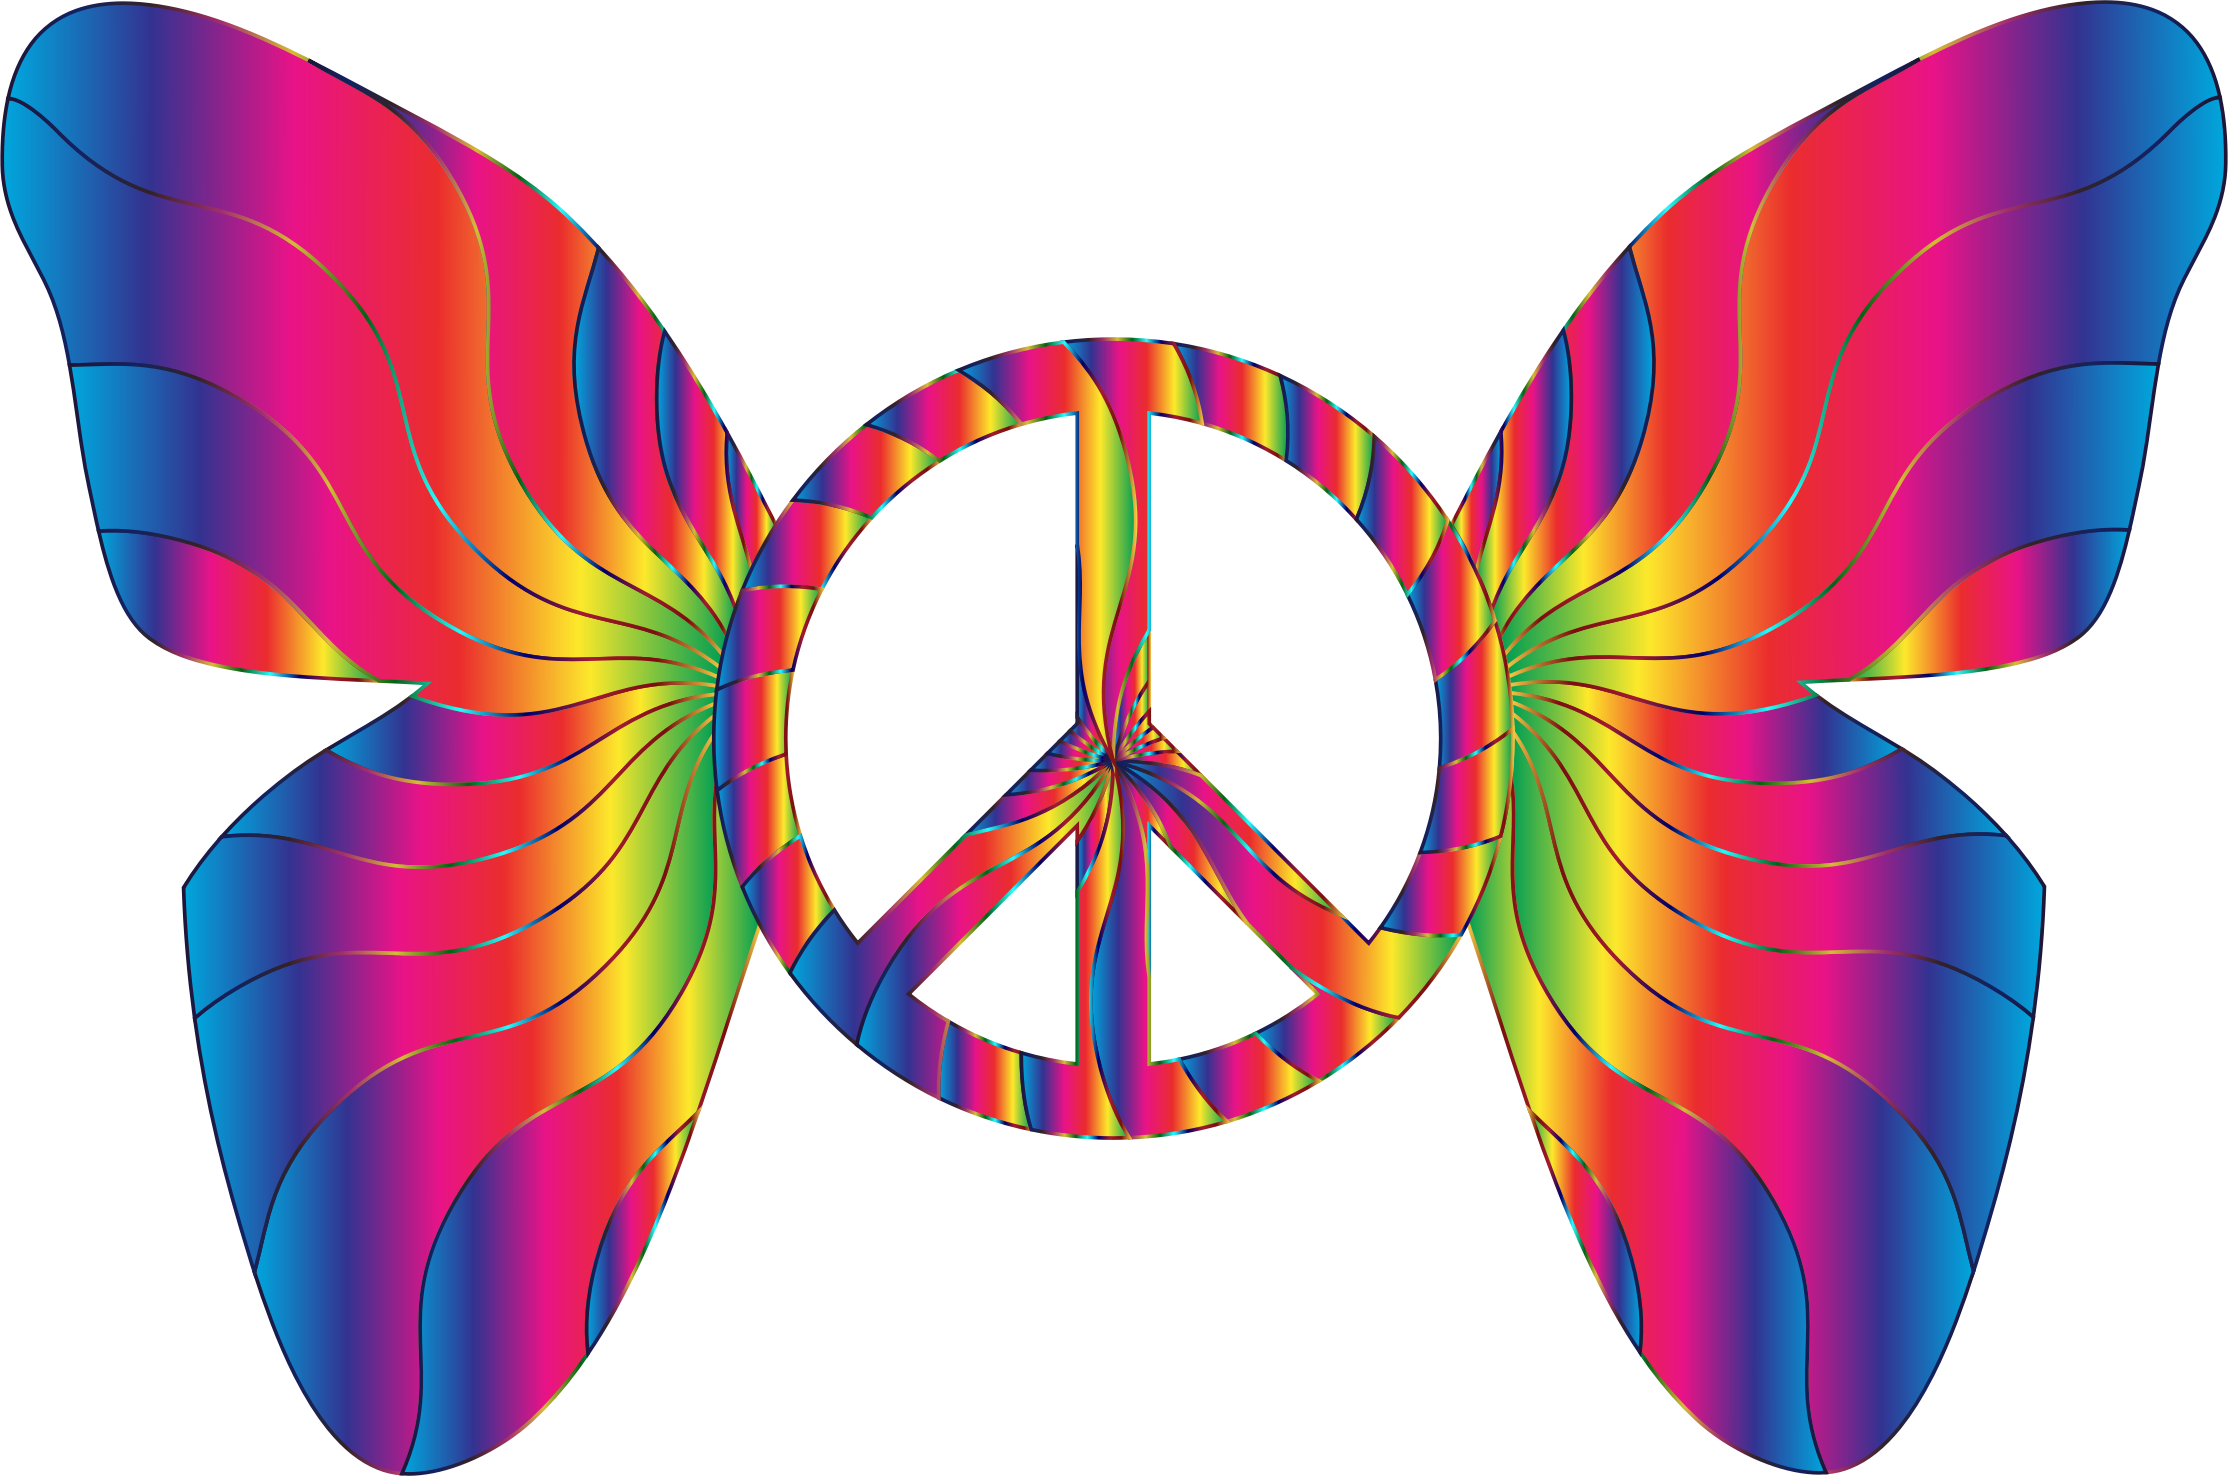 peace-sign-images-free-download-on-clipartmag